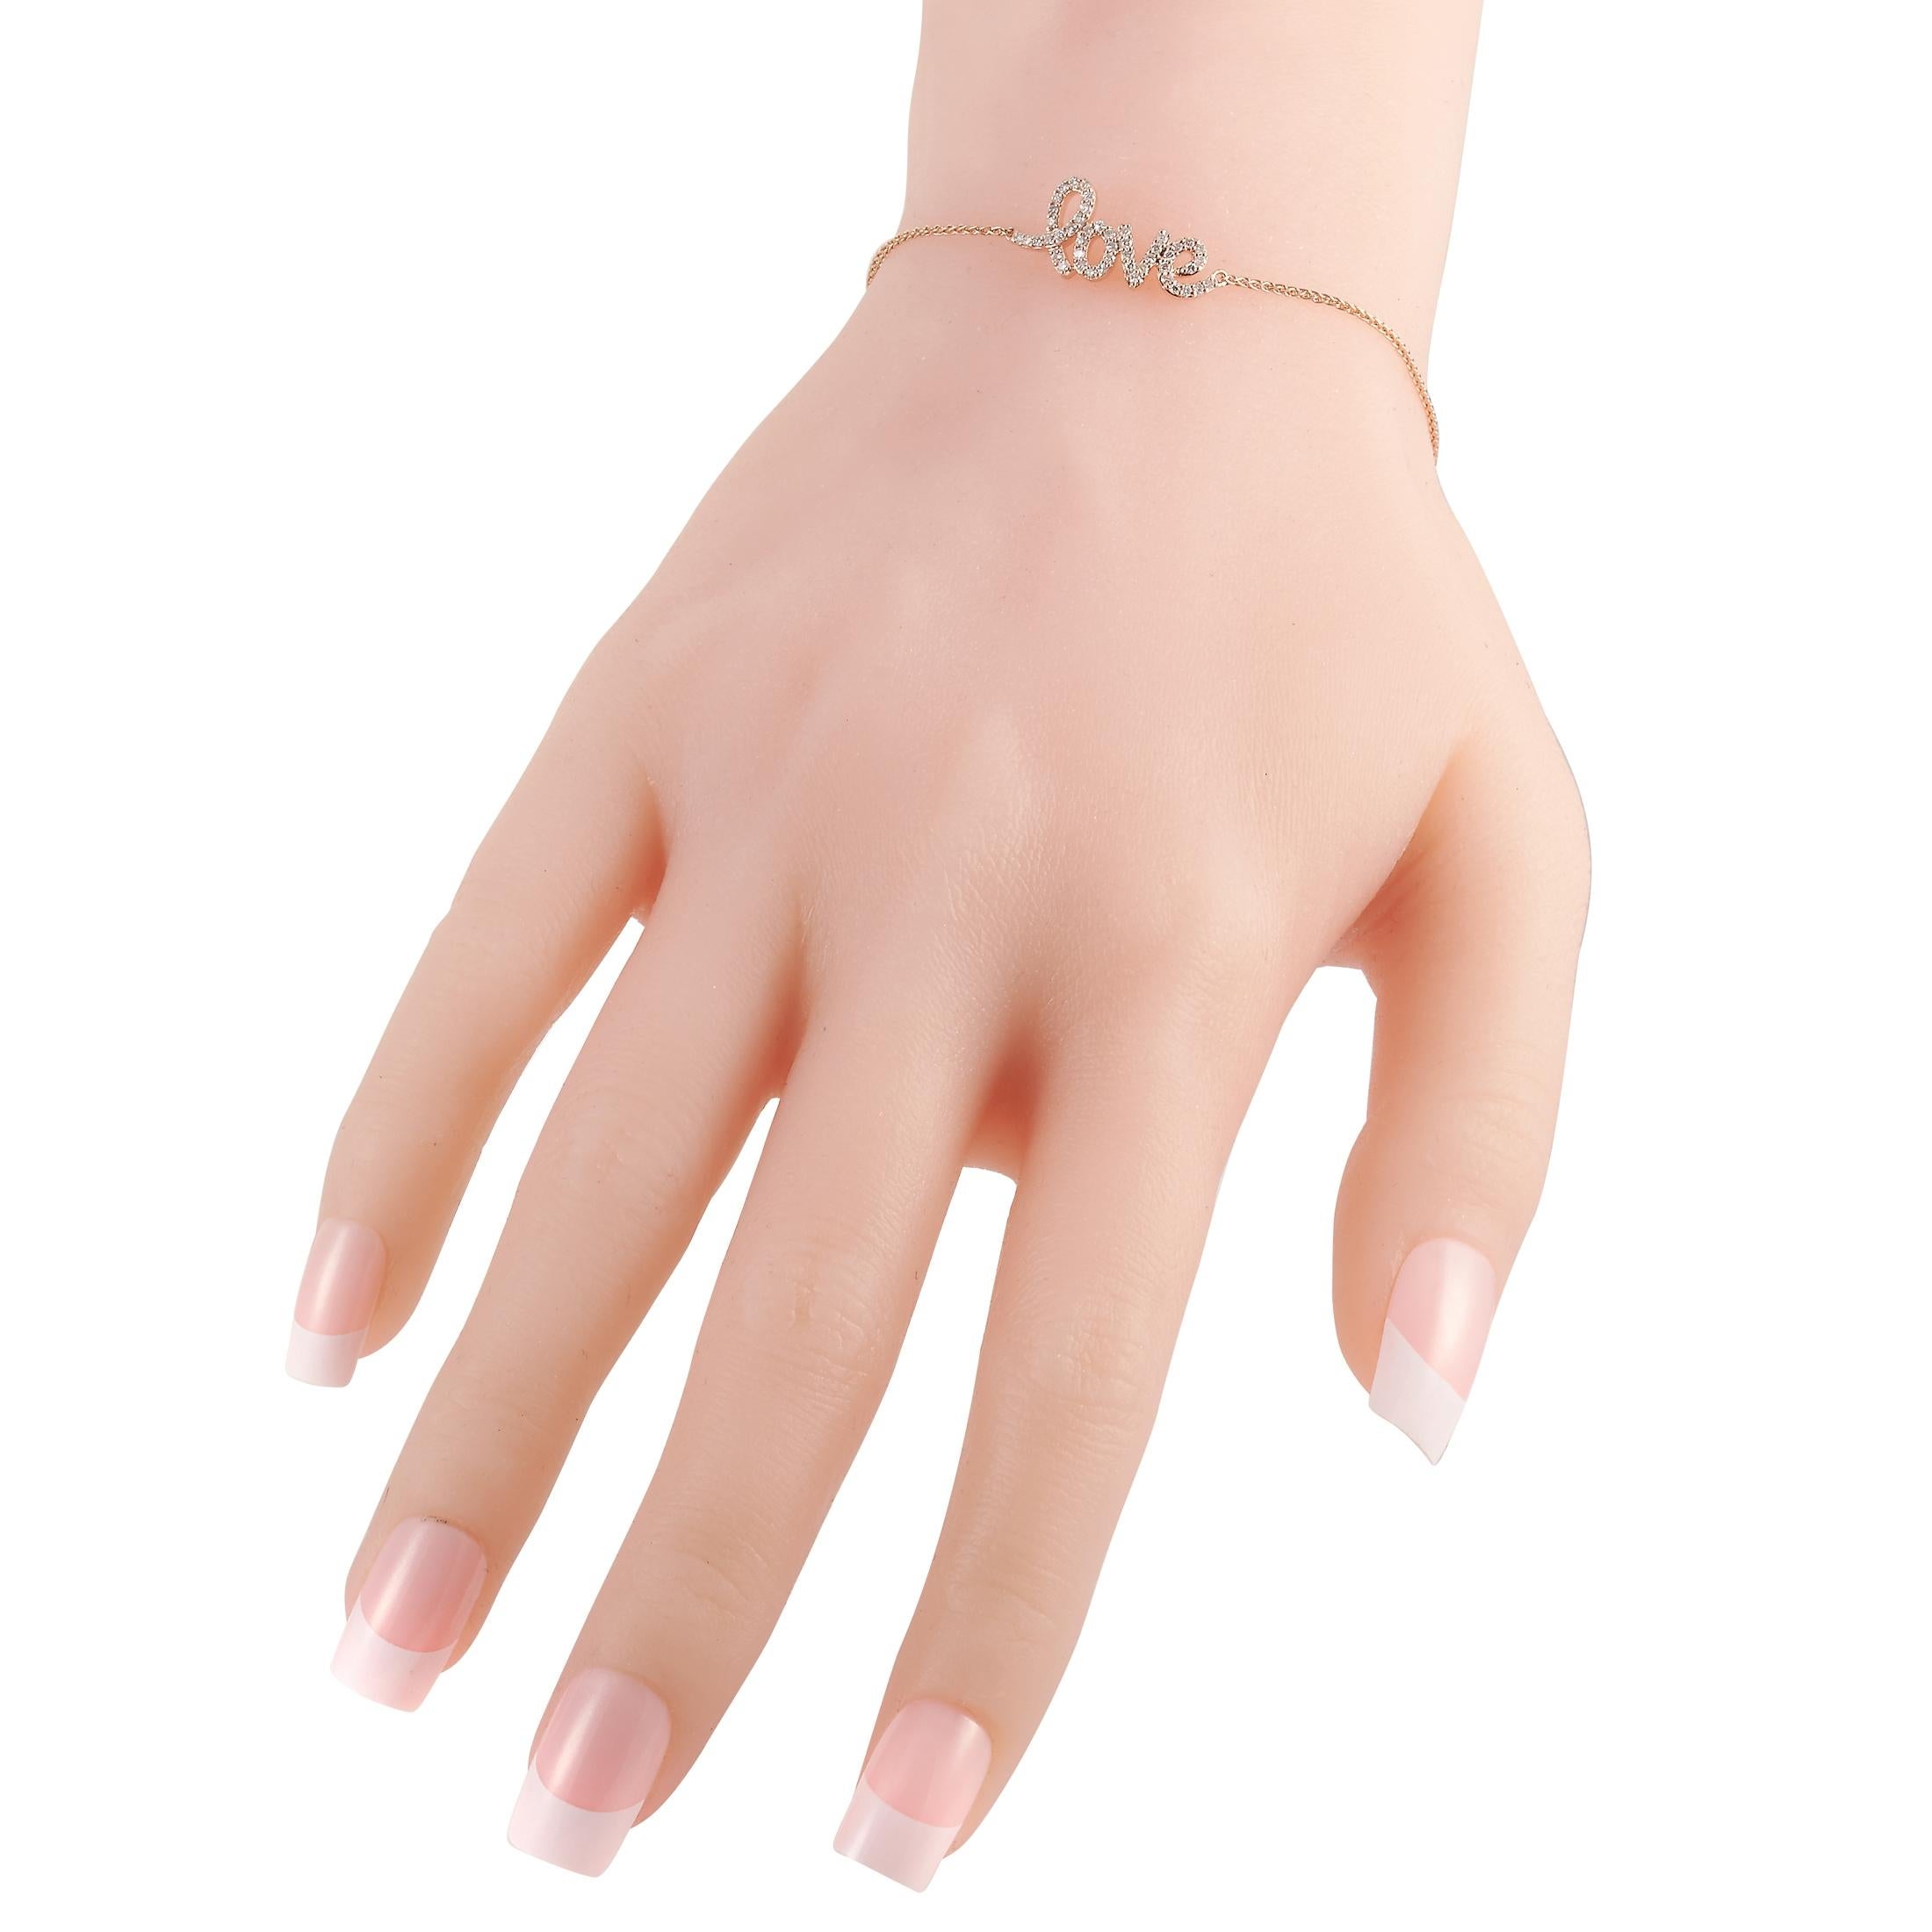 This LB Exclusive love bracelet is made of 14K rose gold and embellished with diamonds that amount to 0.25 carats. The bracelet weighs 4.4 grams and measures 6.50” in length, which is adjustable.
 
 Offered in brand new condition, this jewelry